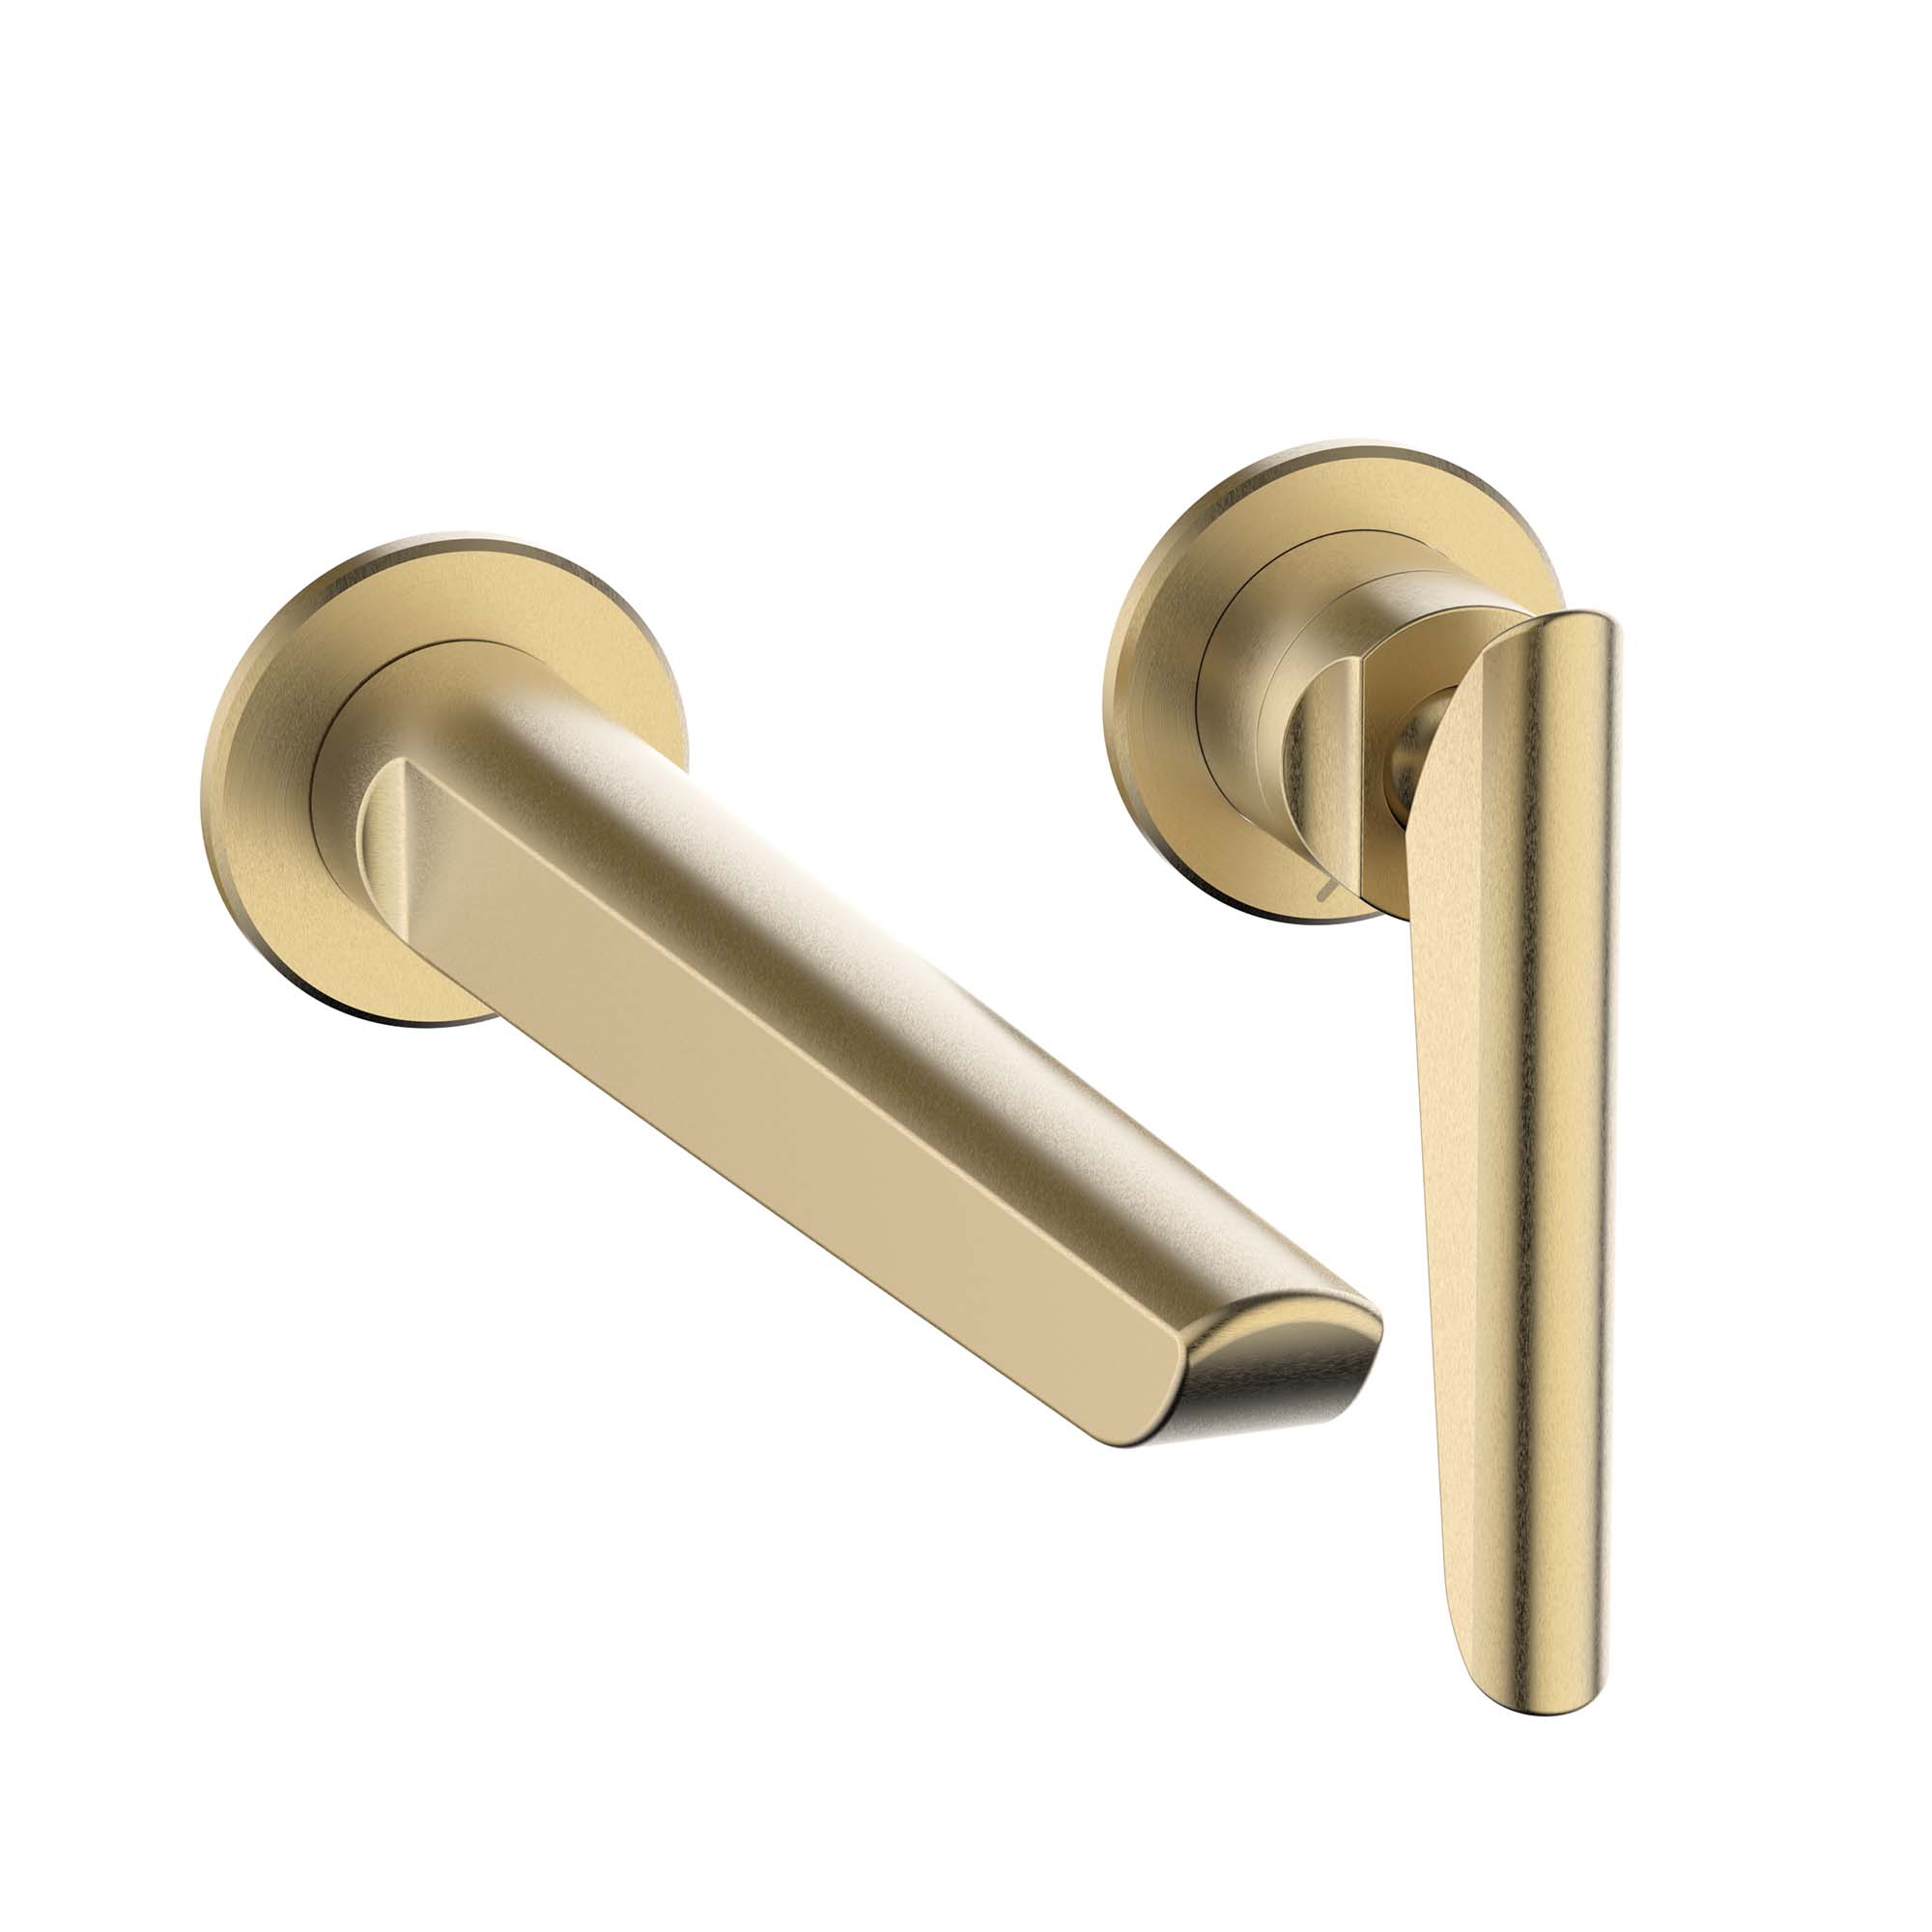 crosswater foile 2 hole wall mounted basin mixer tap brushed brass